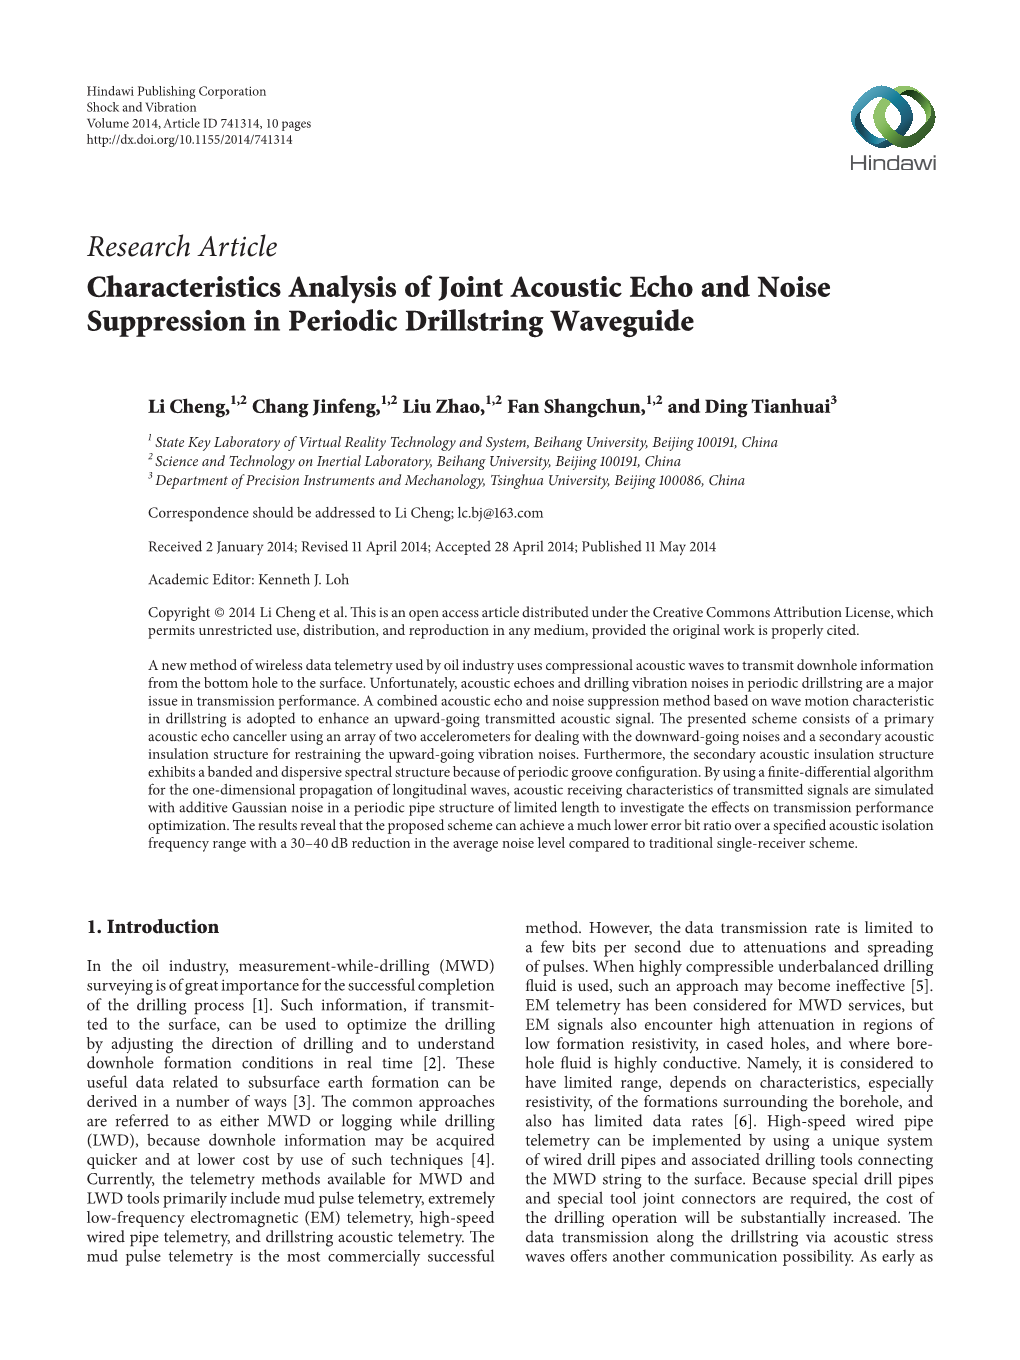 Research Article Characteristics Analysis of Joint Acoustic Echo and Noise Suppression in Periodic Drillstring Waveguide